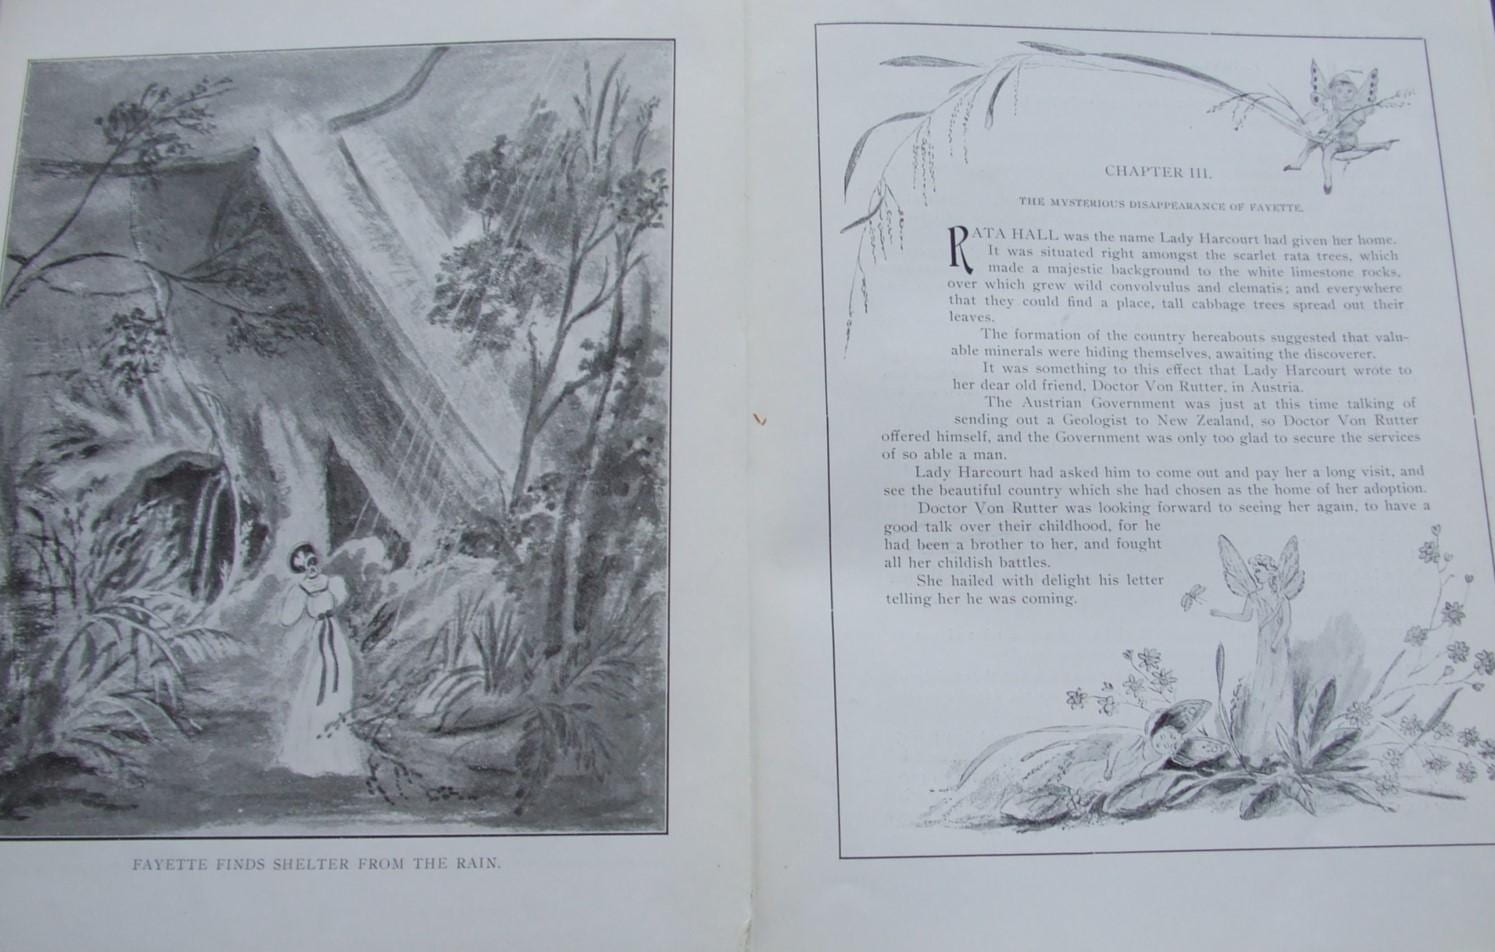 Double page spread with full page illustration on one side, a humanoid figure standing amongst trees and bush, and the first page of chapter three with header and footer seen in gallery